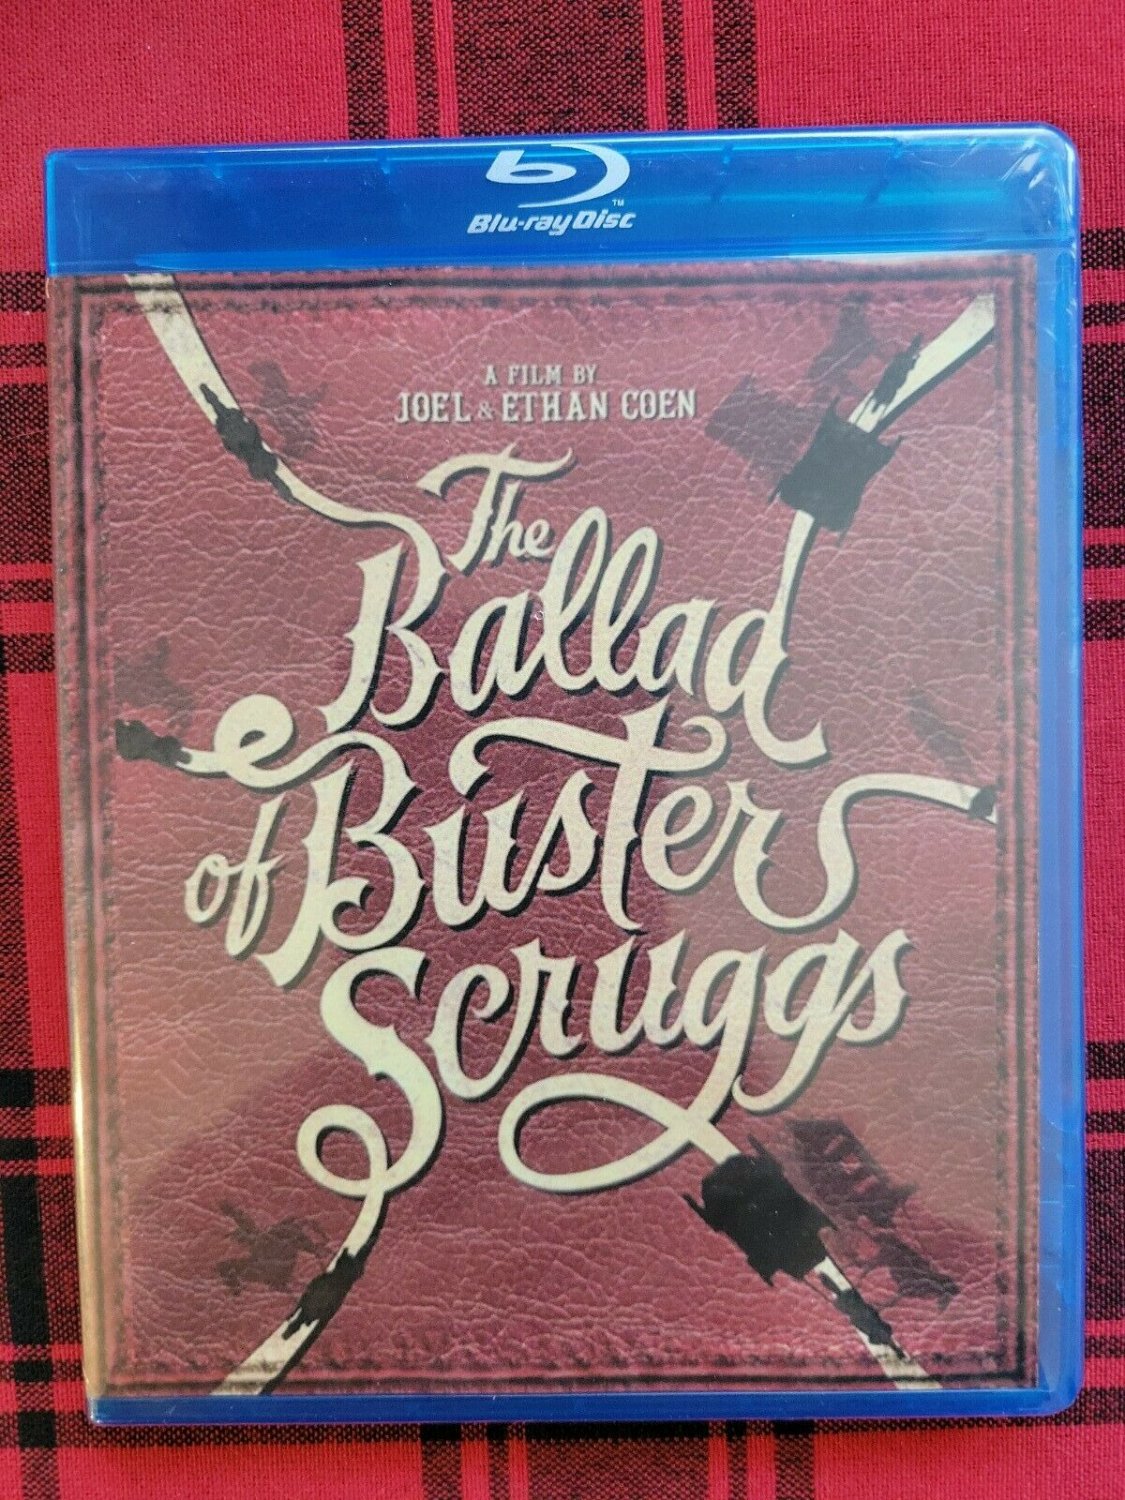 The Ballad Of Buster Scruggs (Blu-ray) 2018 Comedy